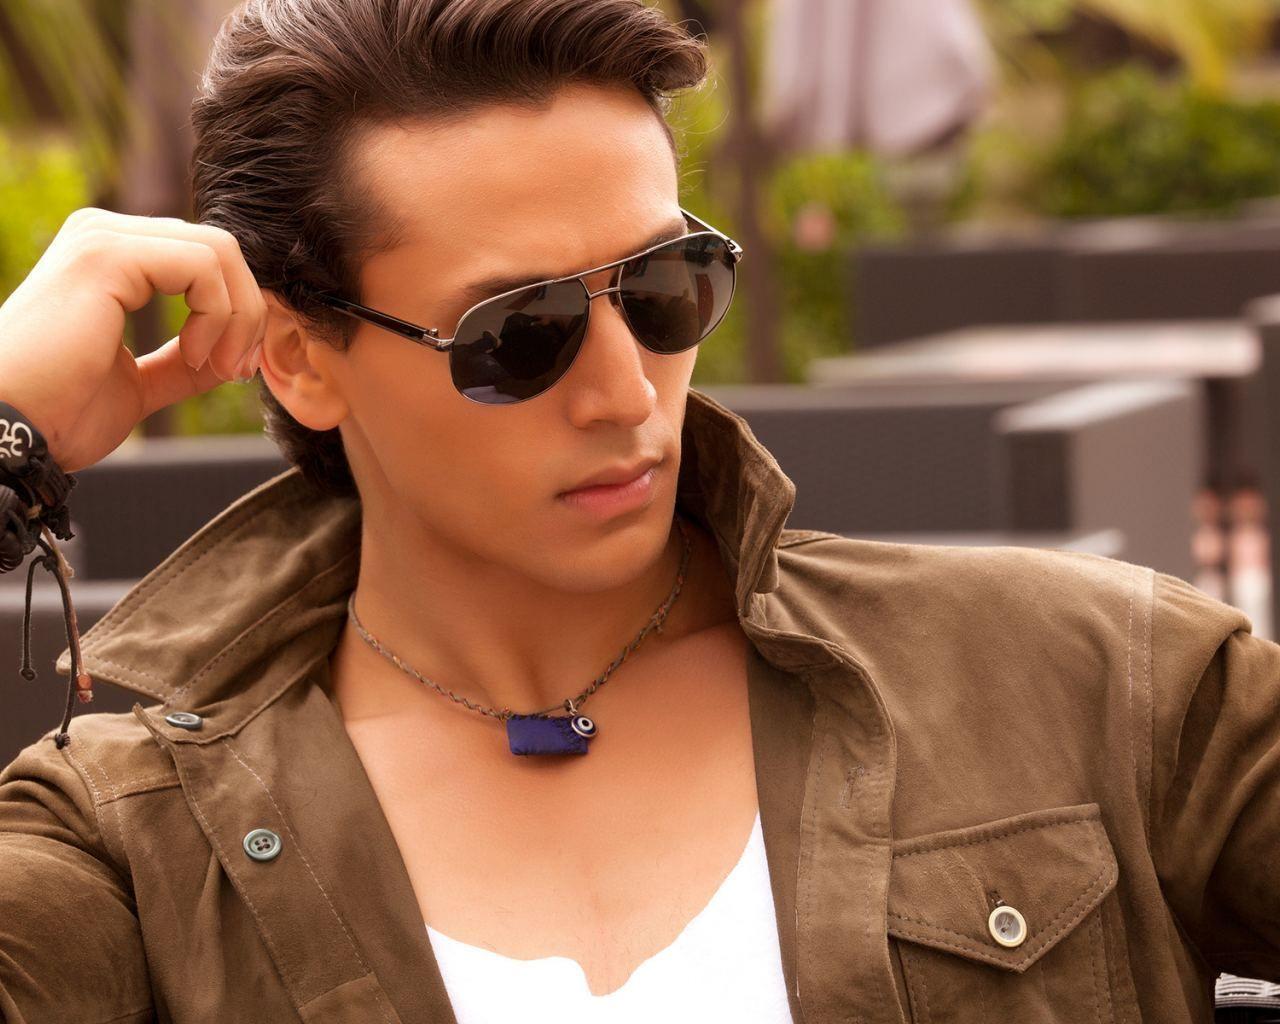 Baaghi Tiger Shroff x 1024 Preview HD Wallpaper for mobile